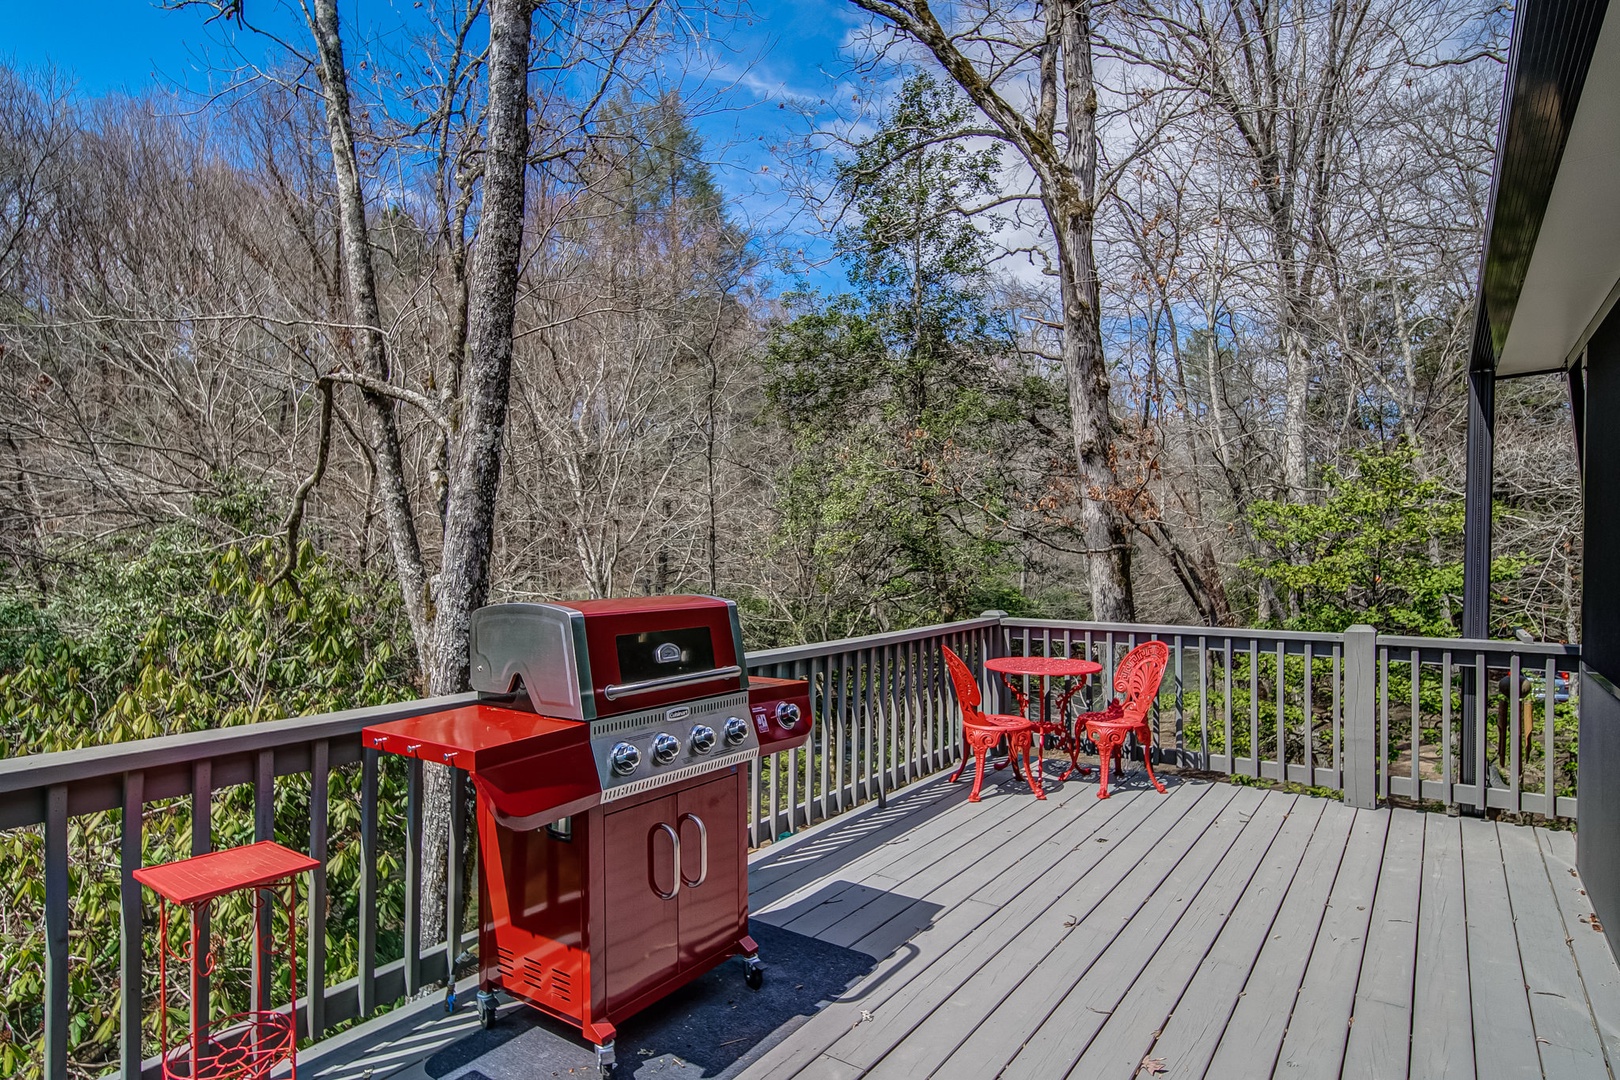 Back Deck for sunning, grilling and enjoying the sounds of the River (2)